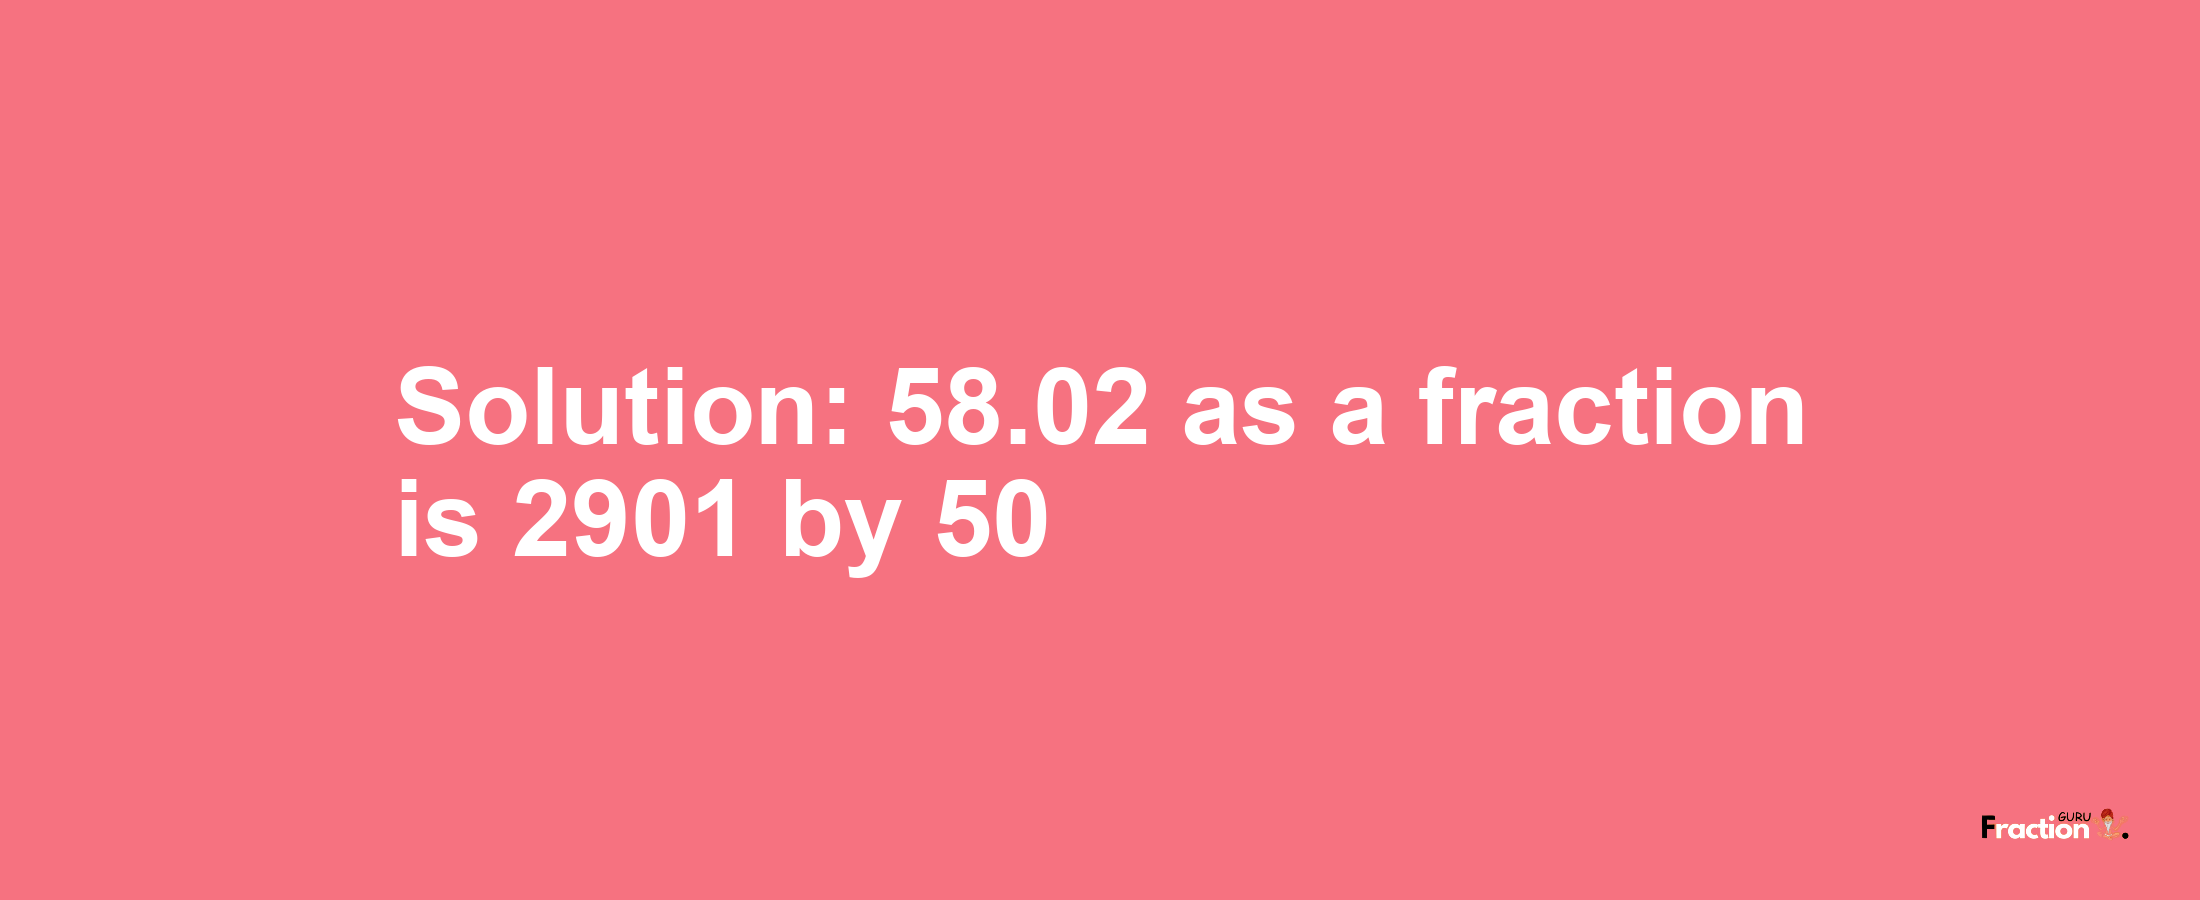 Solution:58.02 as a fraction is 2901/50